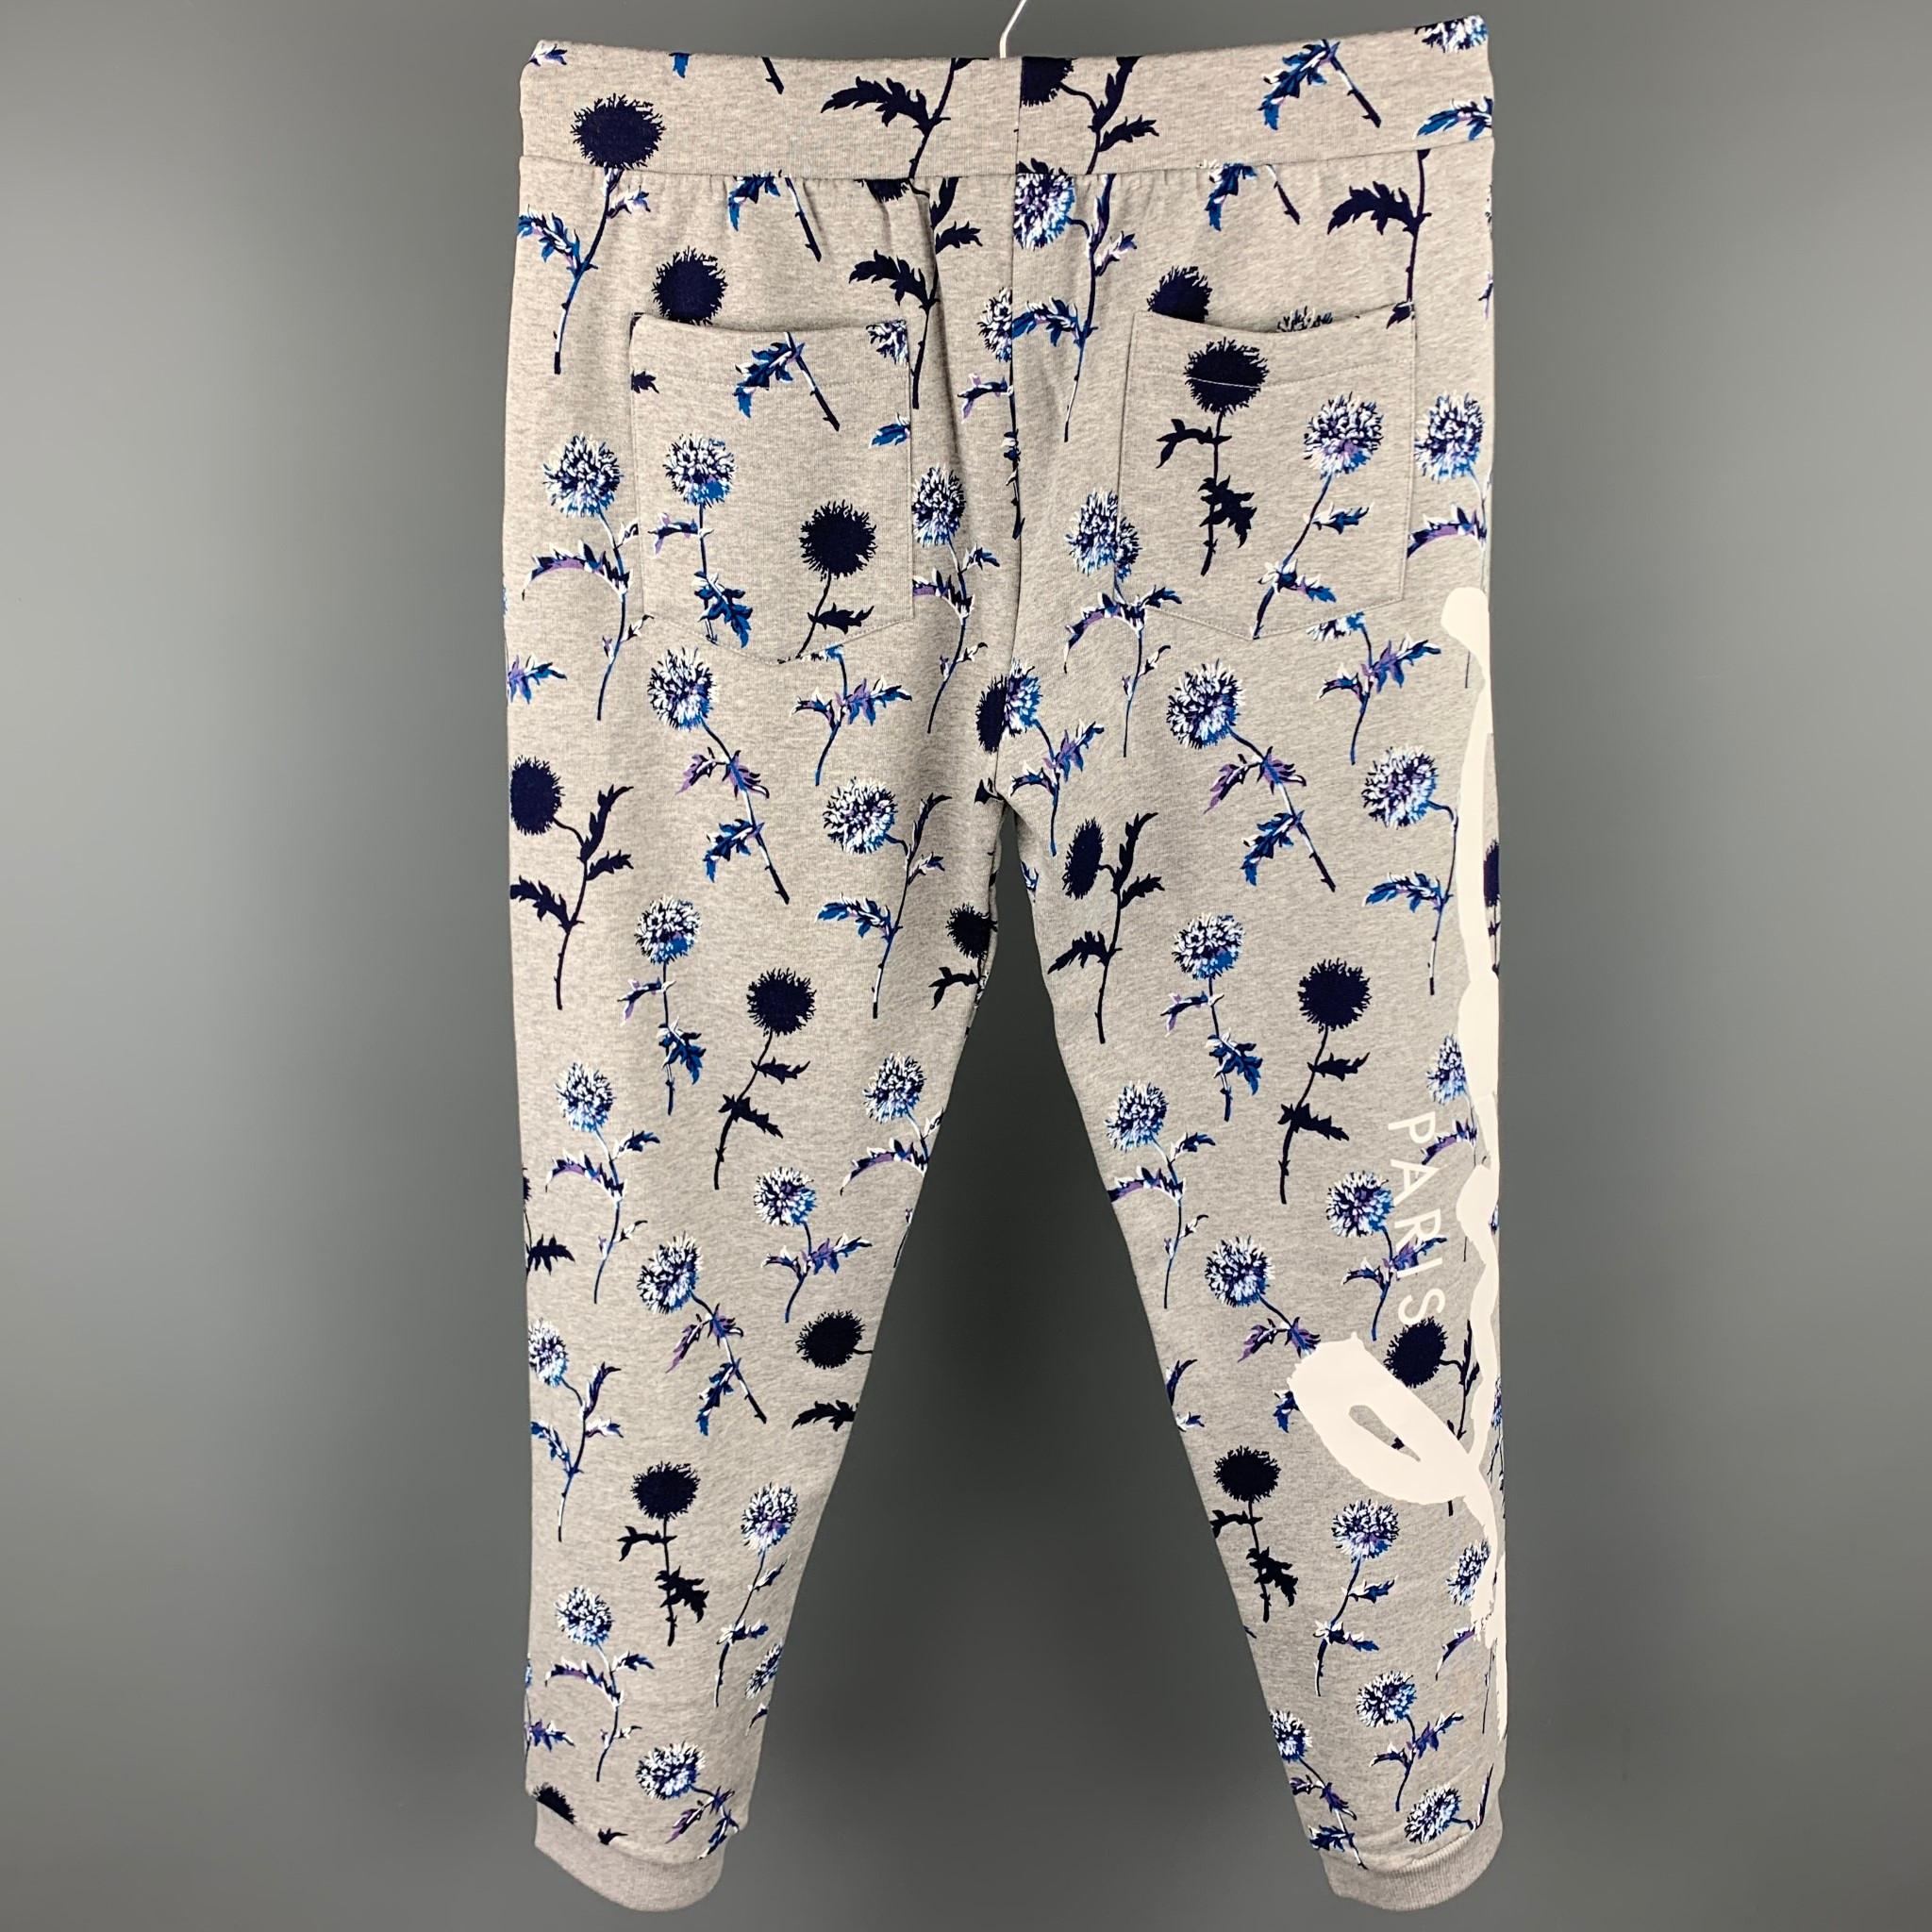 KENZO sweatpants comes in a grey floral cotton with a side logo design featuring slit pockets, elastic waistband, drawstring, and a zip fly closure. Made in Portugal.

Very Good Pre-Owned Condition.
Marked: L

Measurements:

Waist: 32 in.
Rise: 12